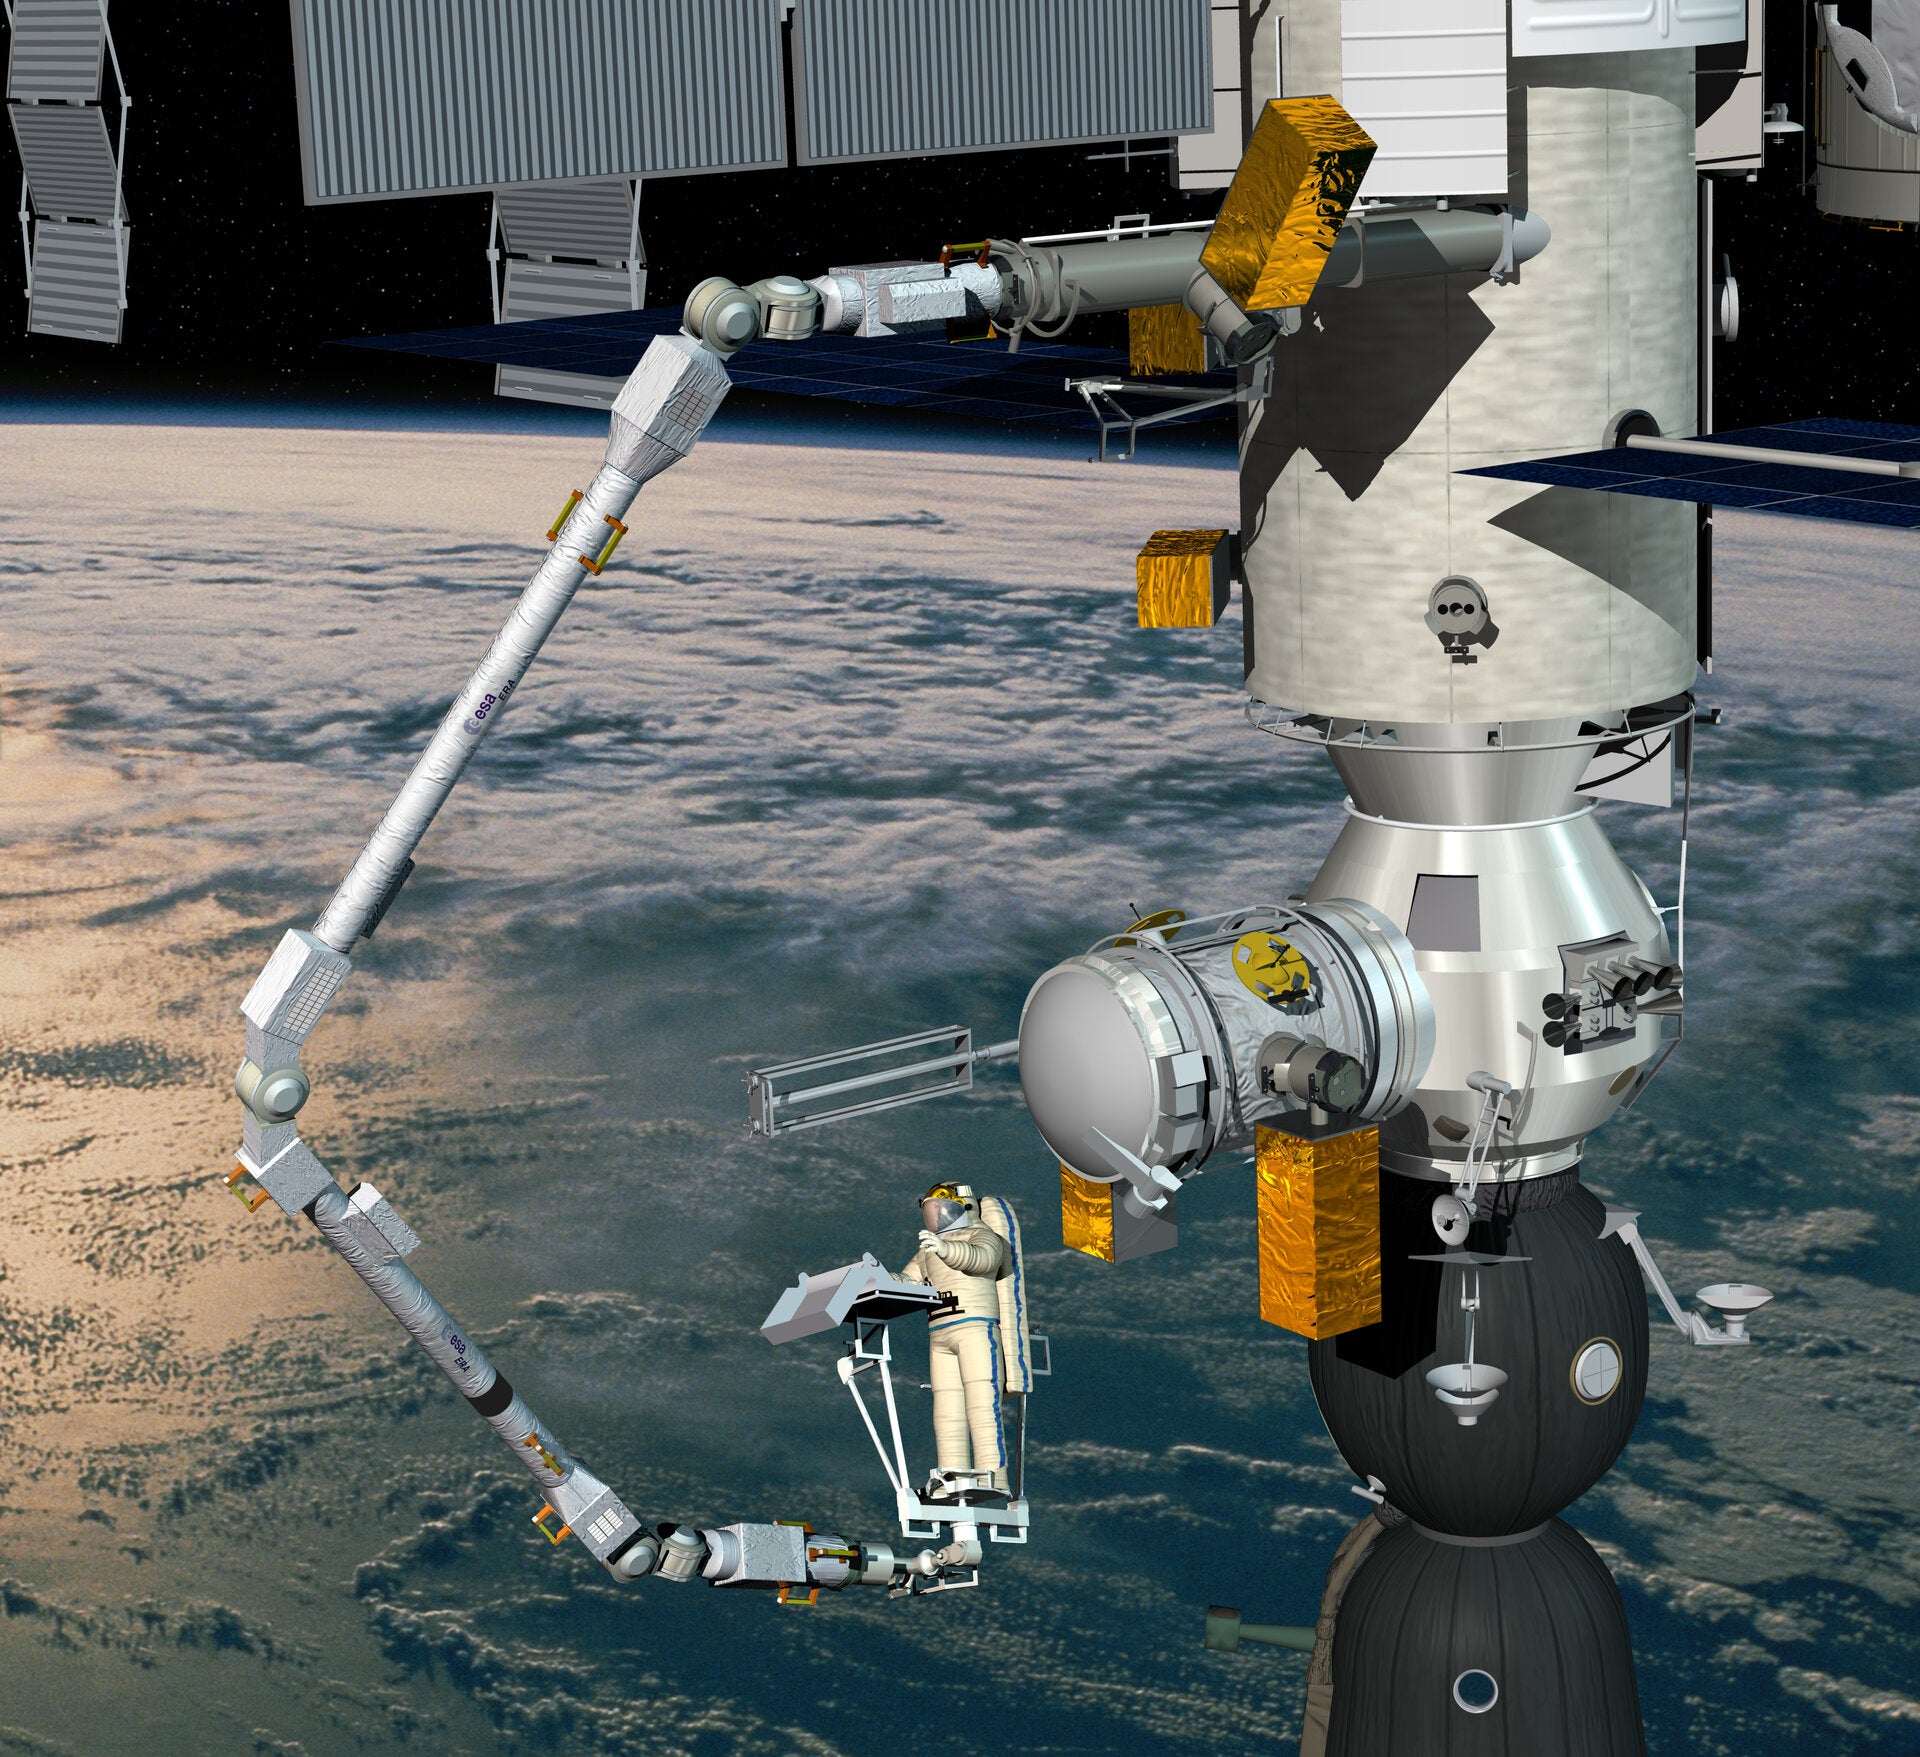 An artist's depiction of the giant robot arm in action outside the ISS. (Illustration: ESA)